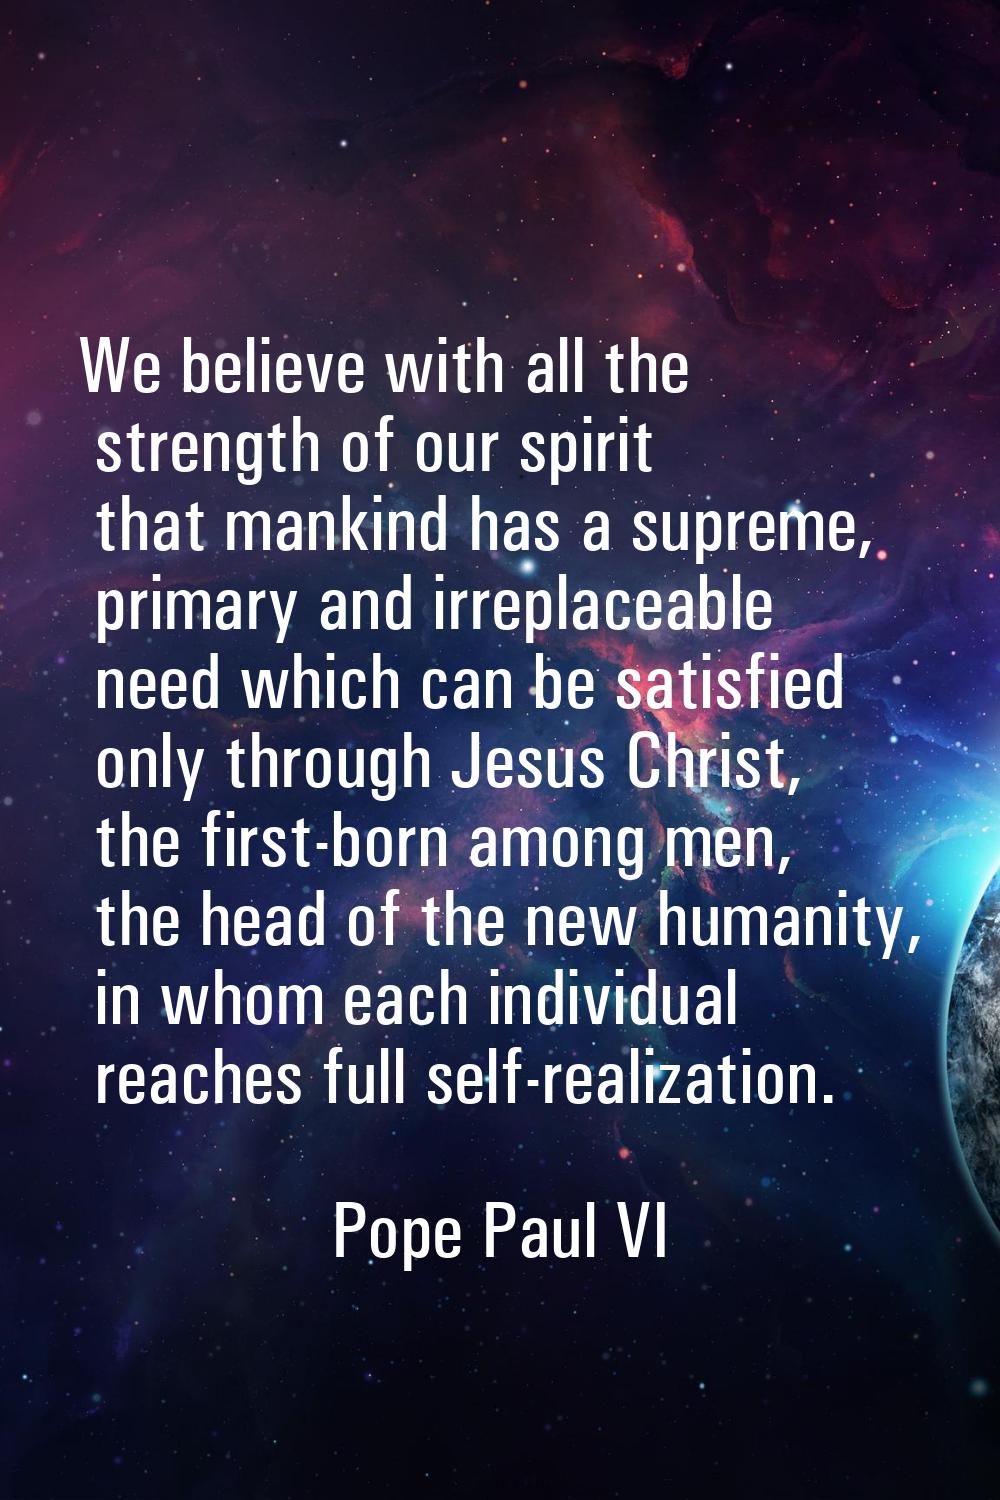 We believe with all the strength of our spirit that mankind has a supreme, primary and irreplaceabl